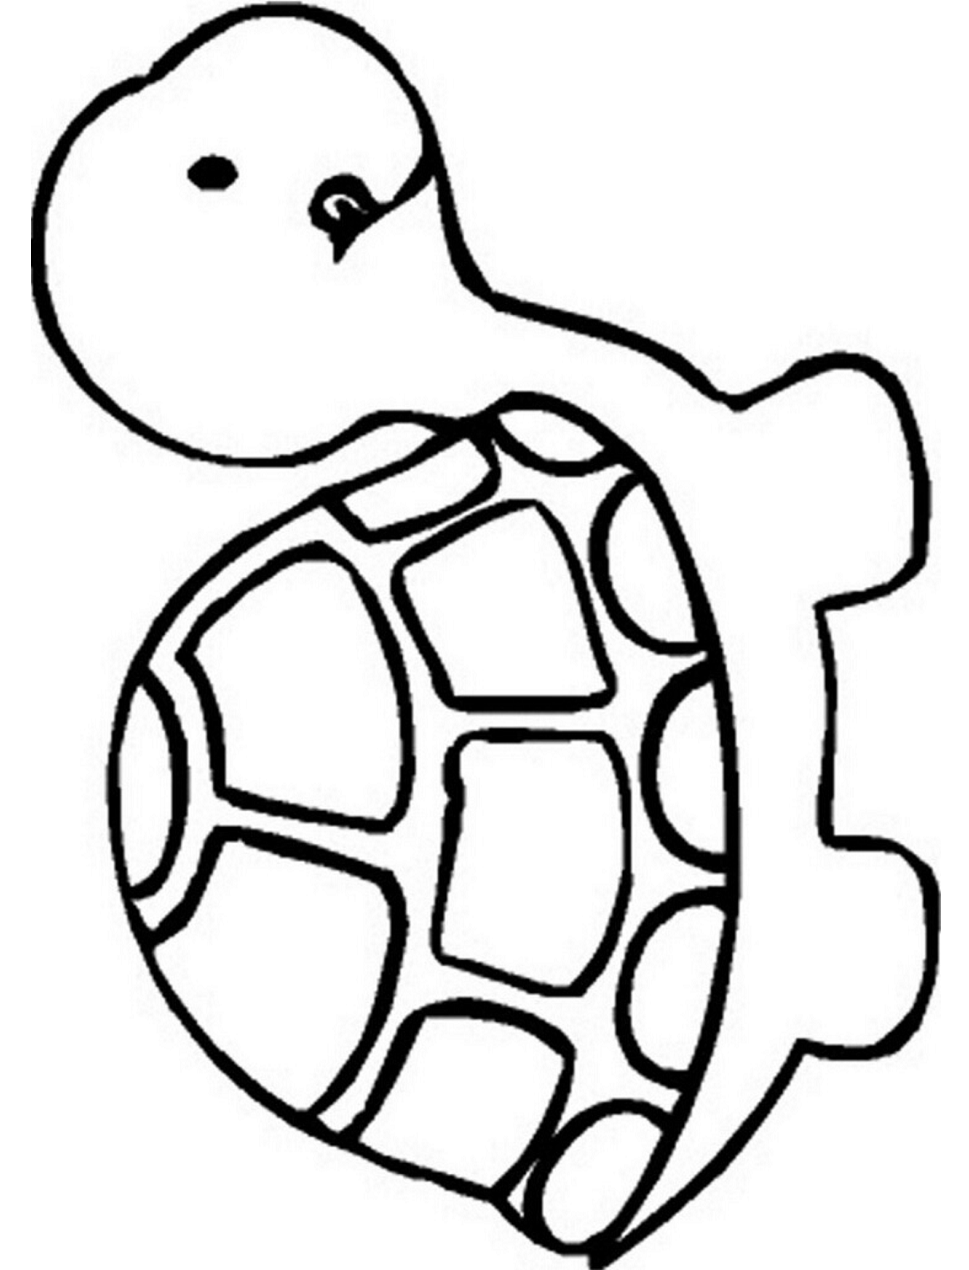 Download Turtle For Child Coloring Page - Free Printable Coloring ...